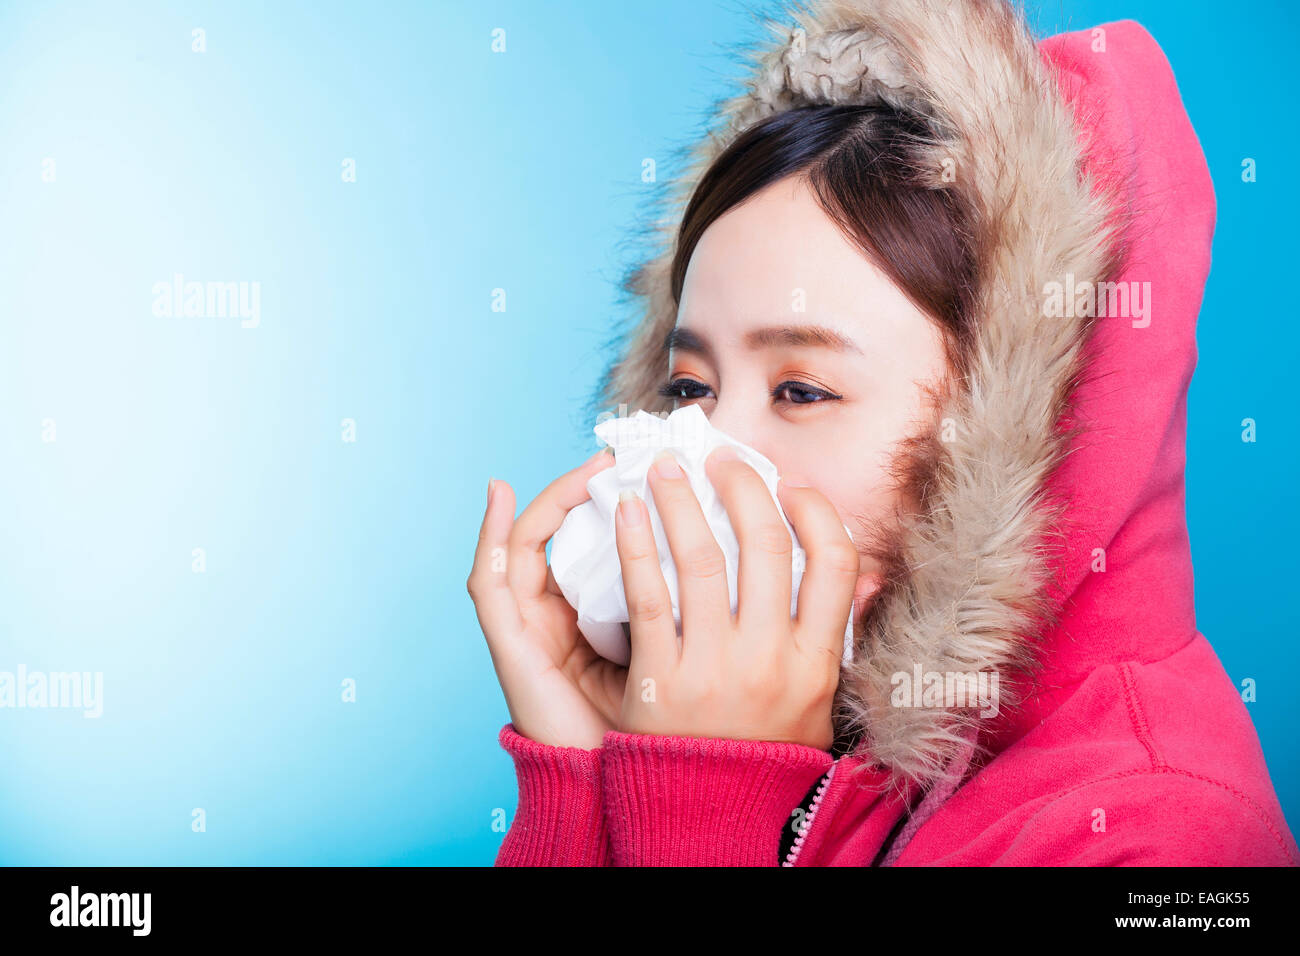 young Woman blowing her nose Stock Photo